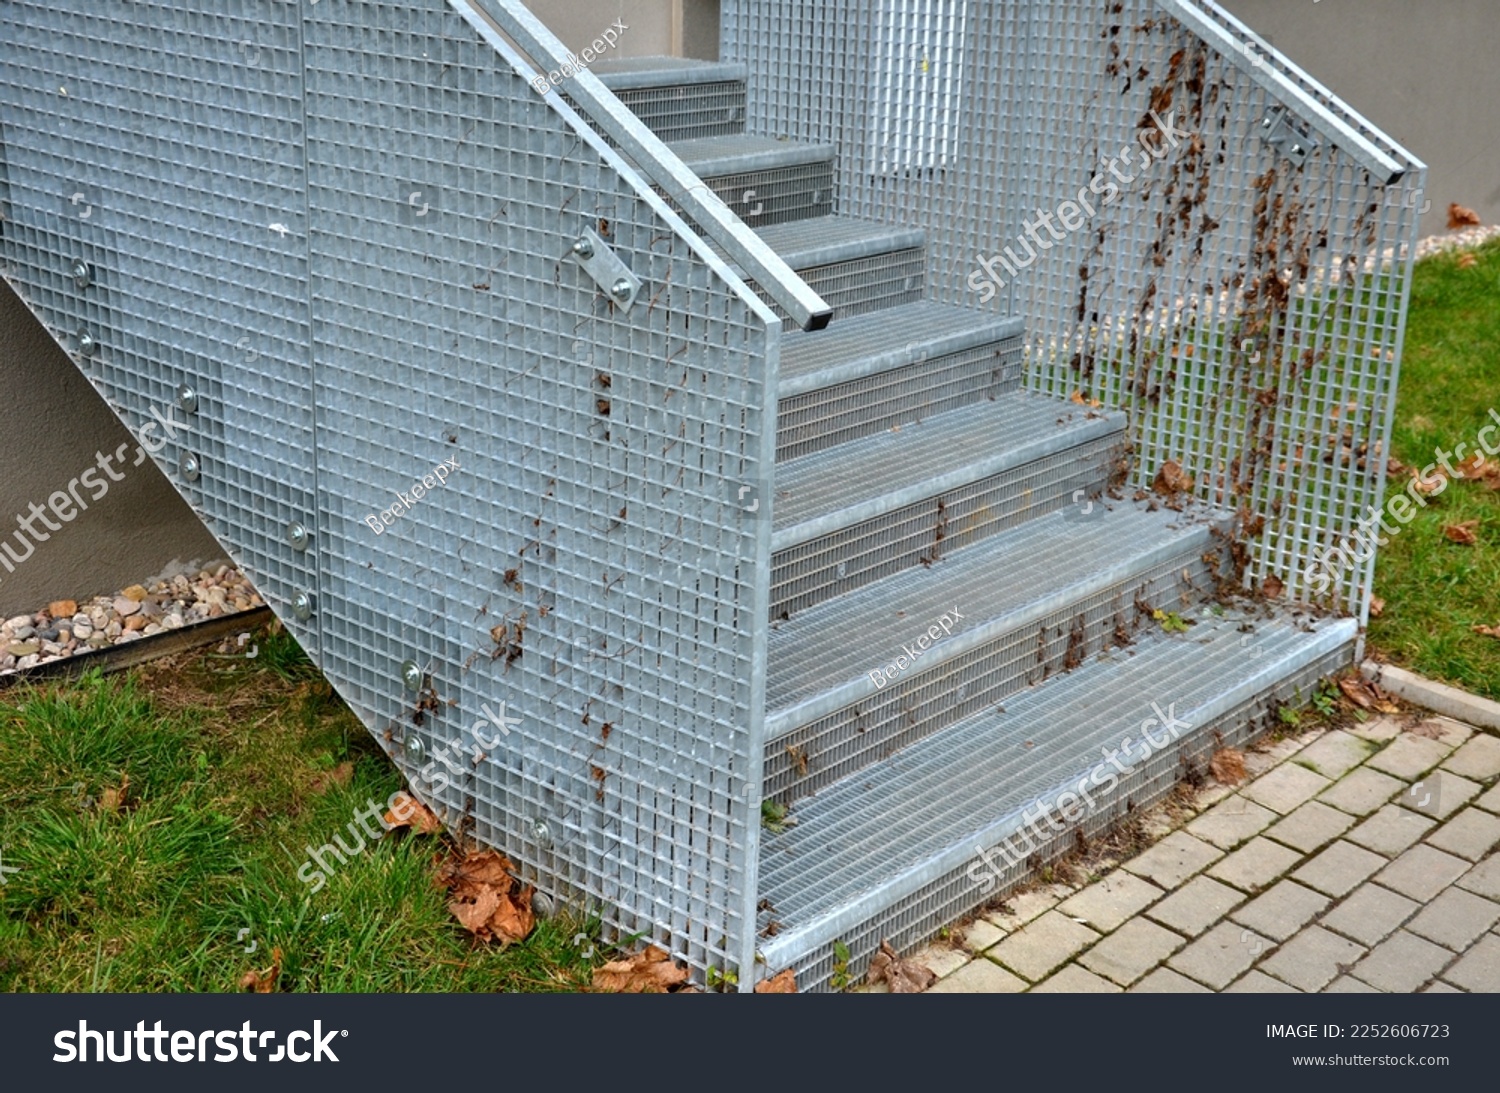 Stairs to a residential building made of stainless steel grid. galvanized stair grating made of expanded metal. lawn concrete sidewalk.  #2252606723